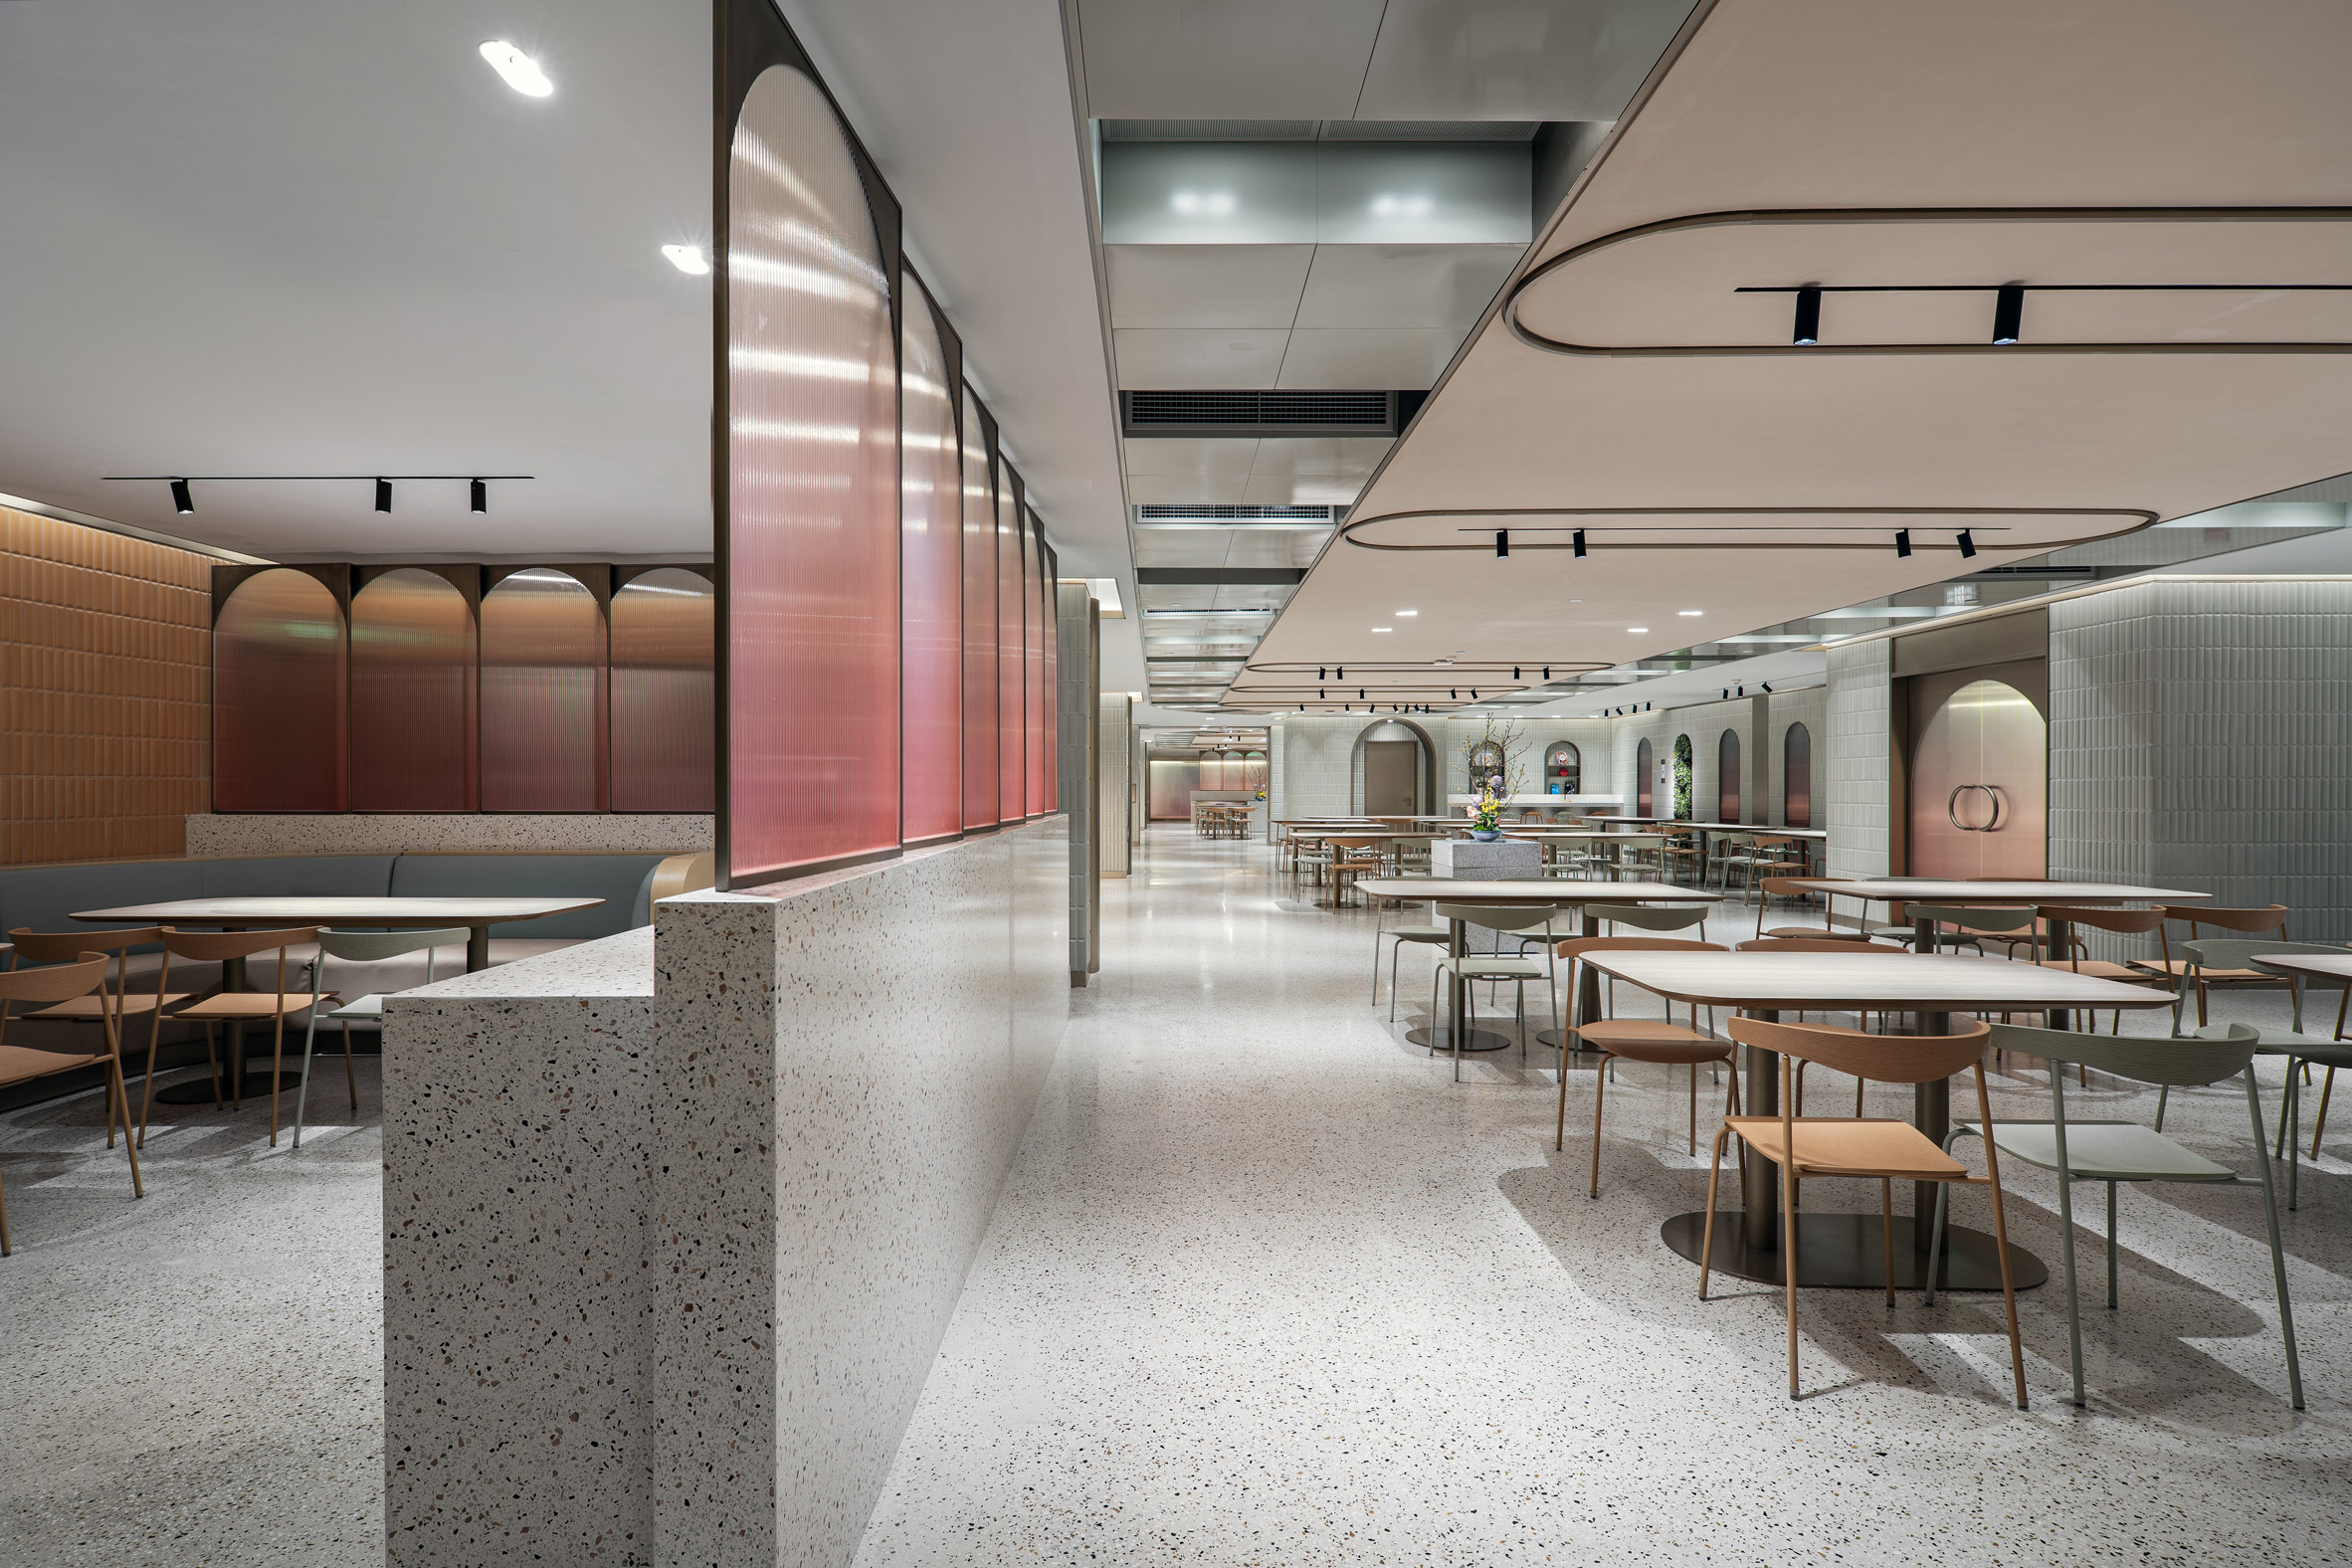 Jiaming Dining Hall with terrazzo floors and two seating areas